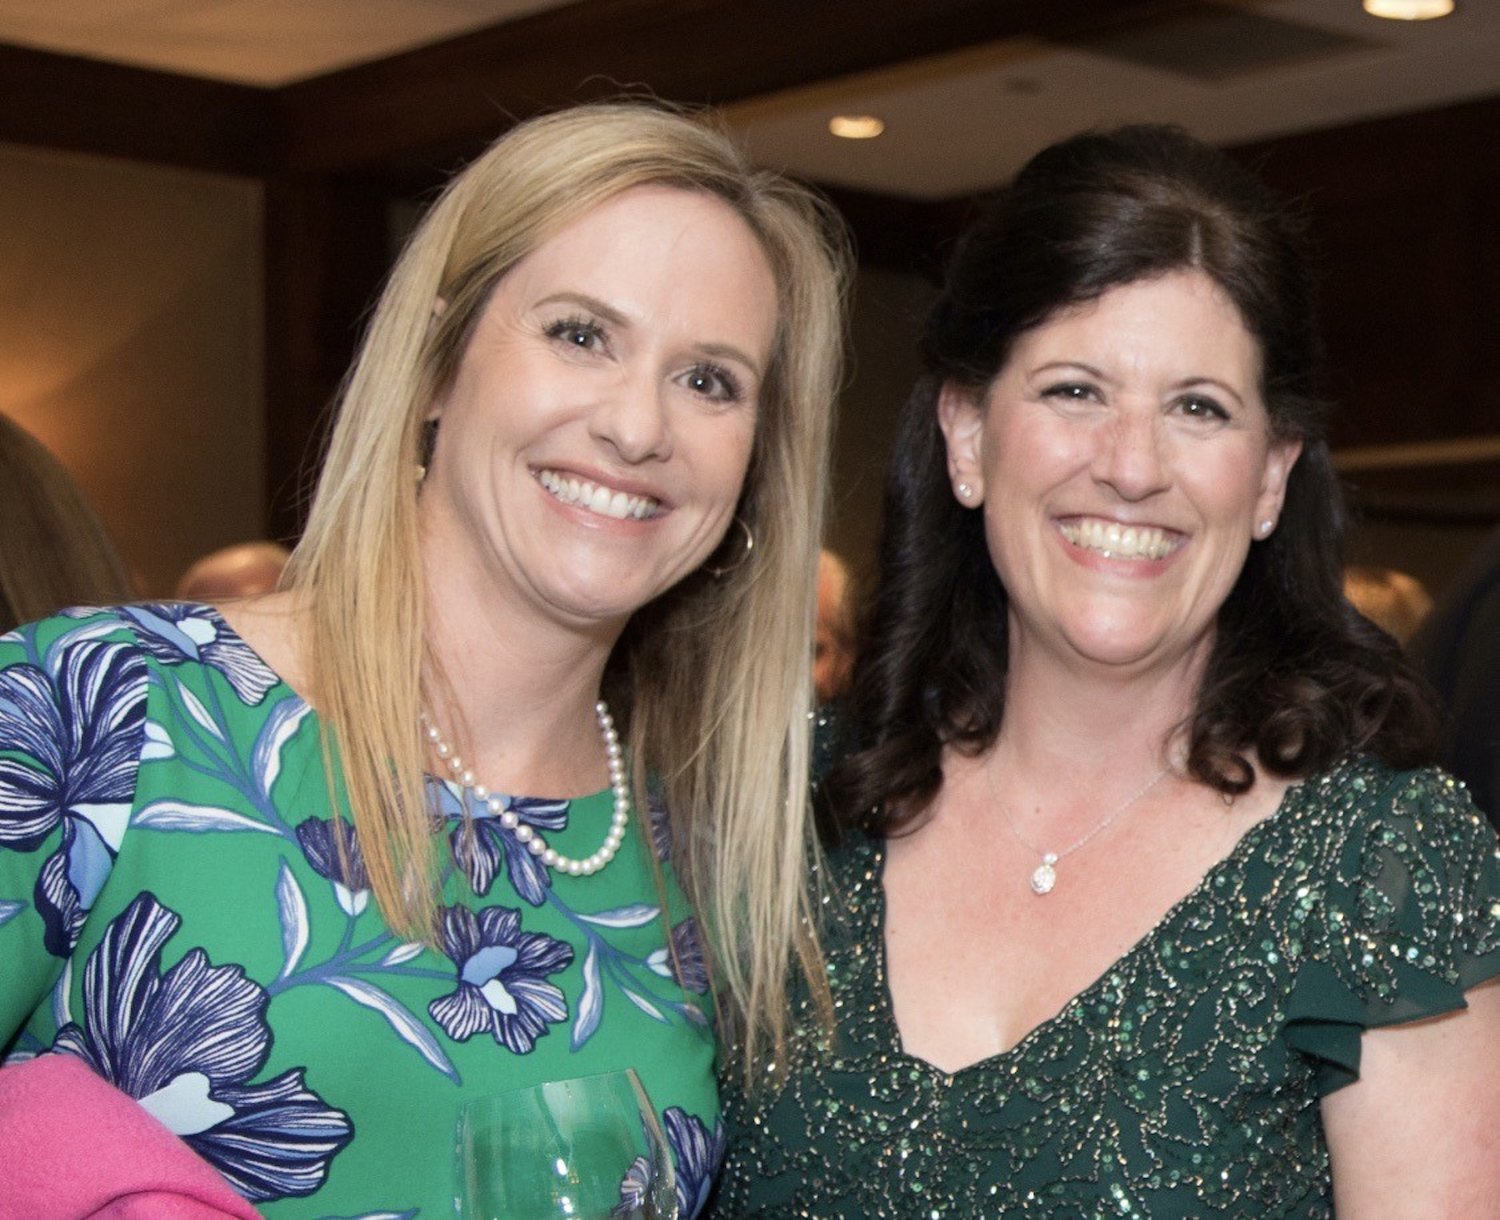 Laura Altman, left, and Kathleen Baxley will be honored for their efforts as part of the Rockville Centre Breast Cancer Coalition at its gala on March 11.